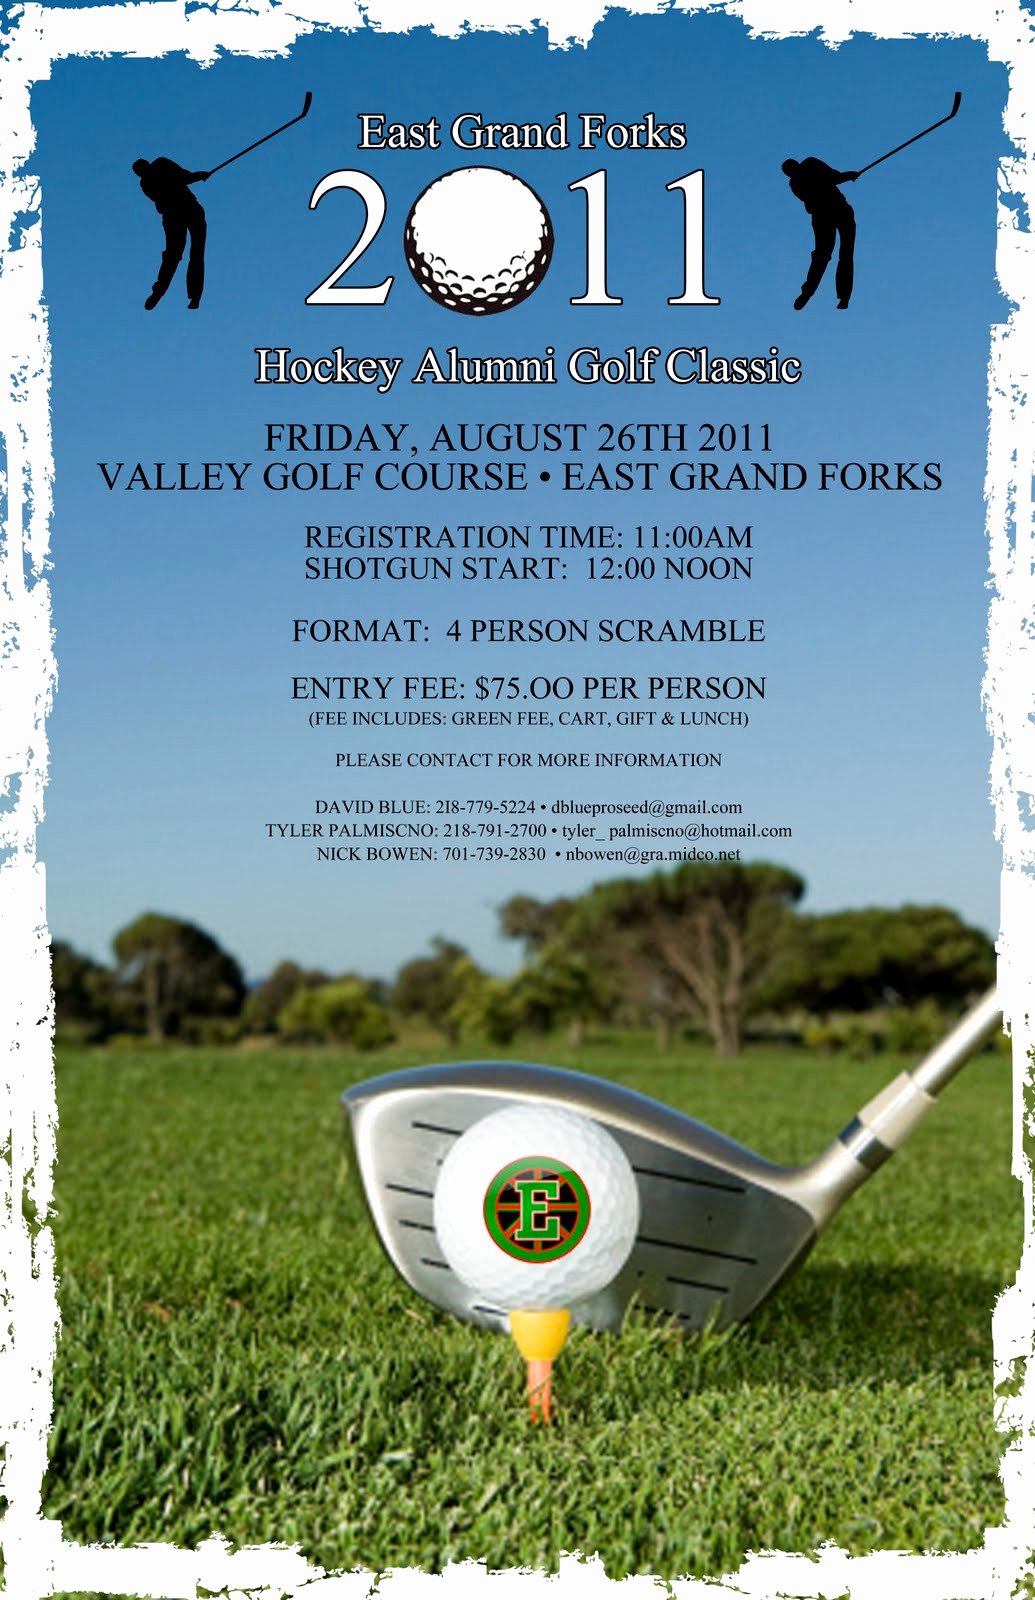 Golf tournament Flyers Template Best Of East Grand forks Greenwave Hockey Golf tournament